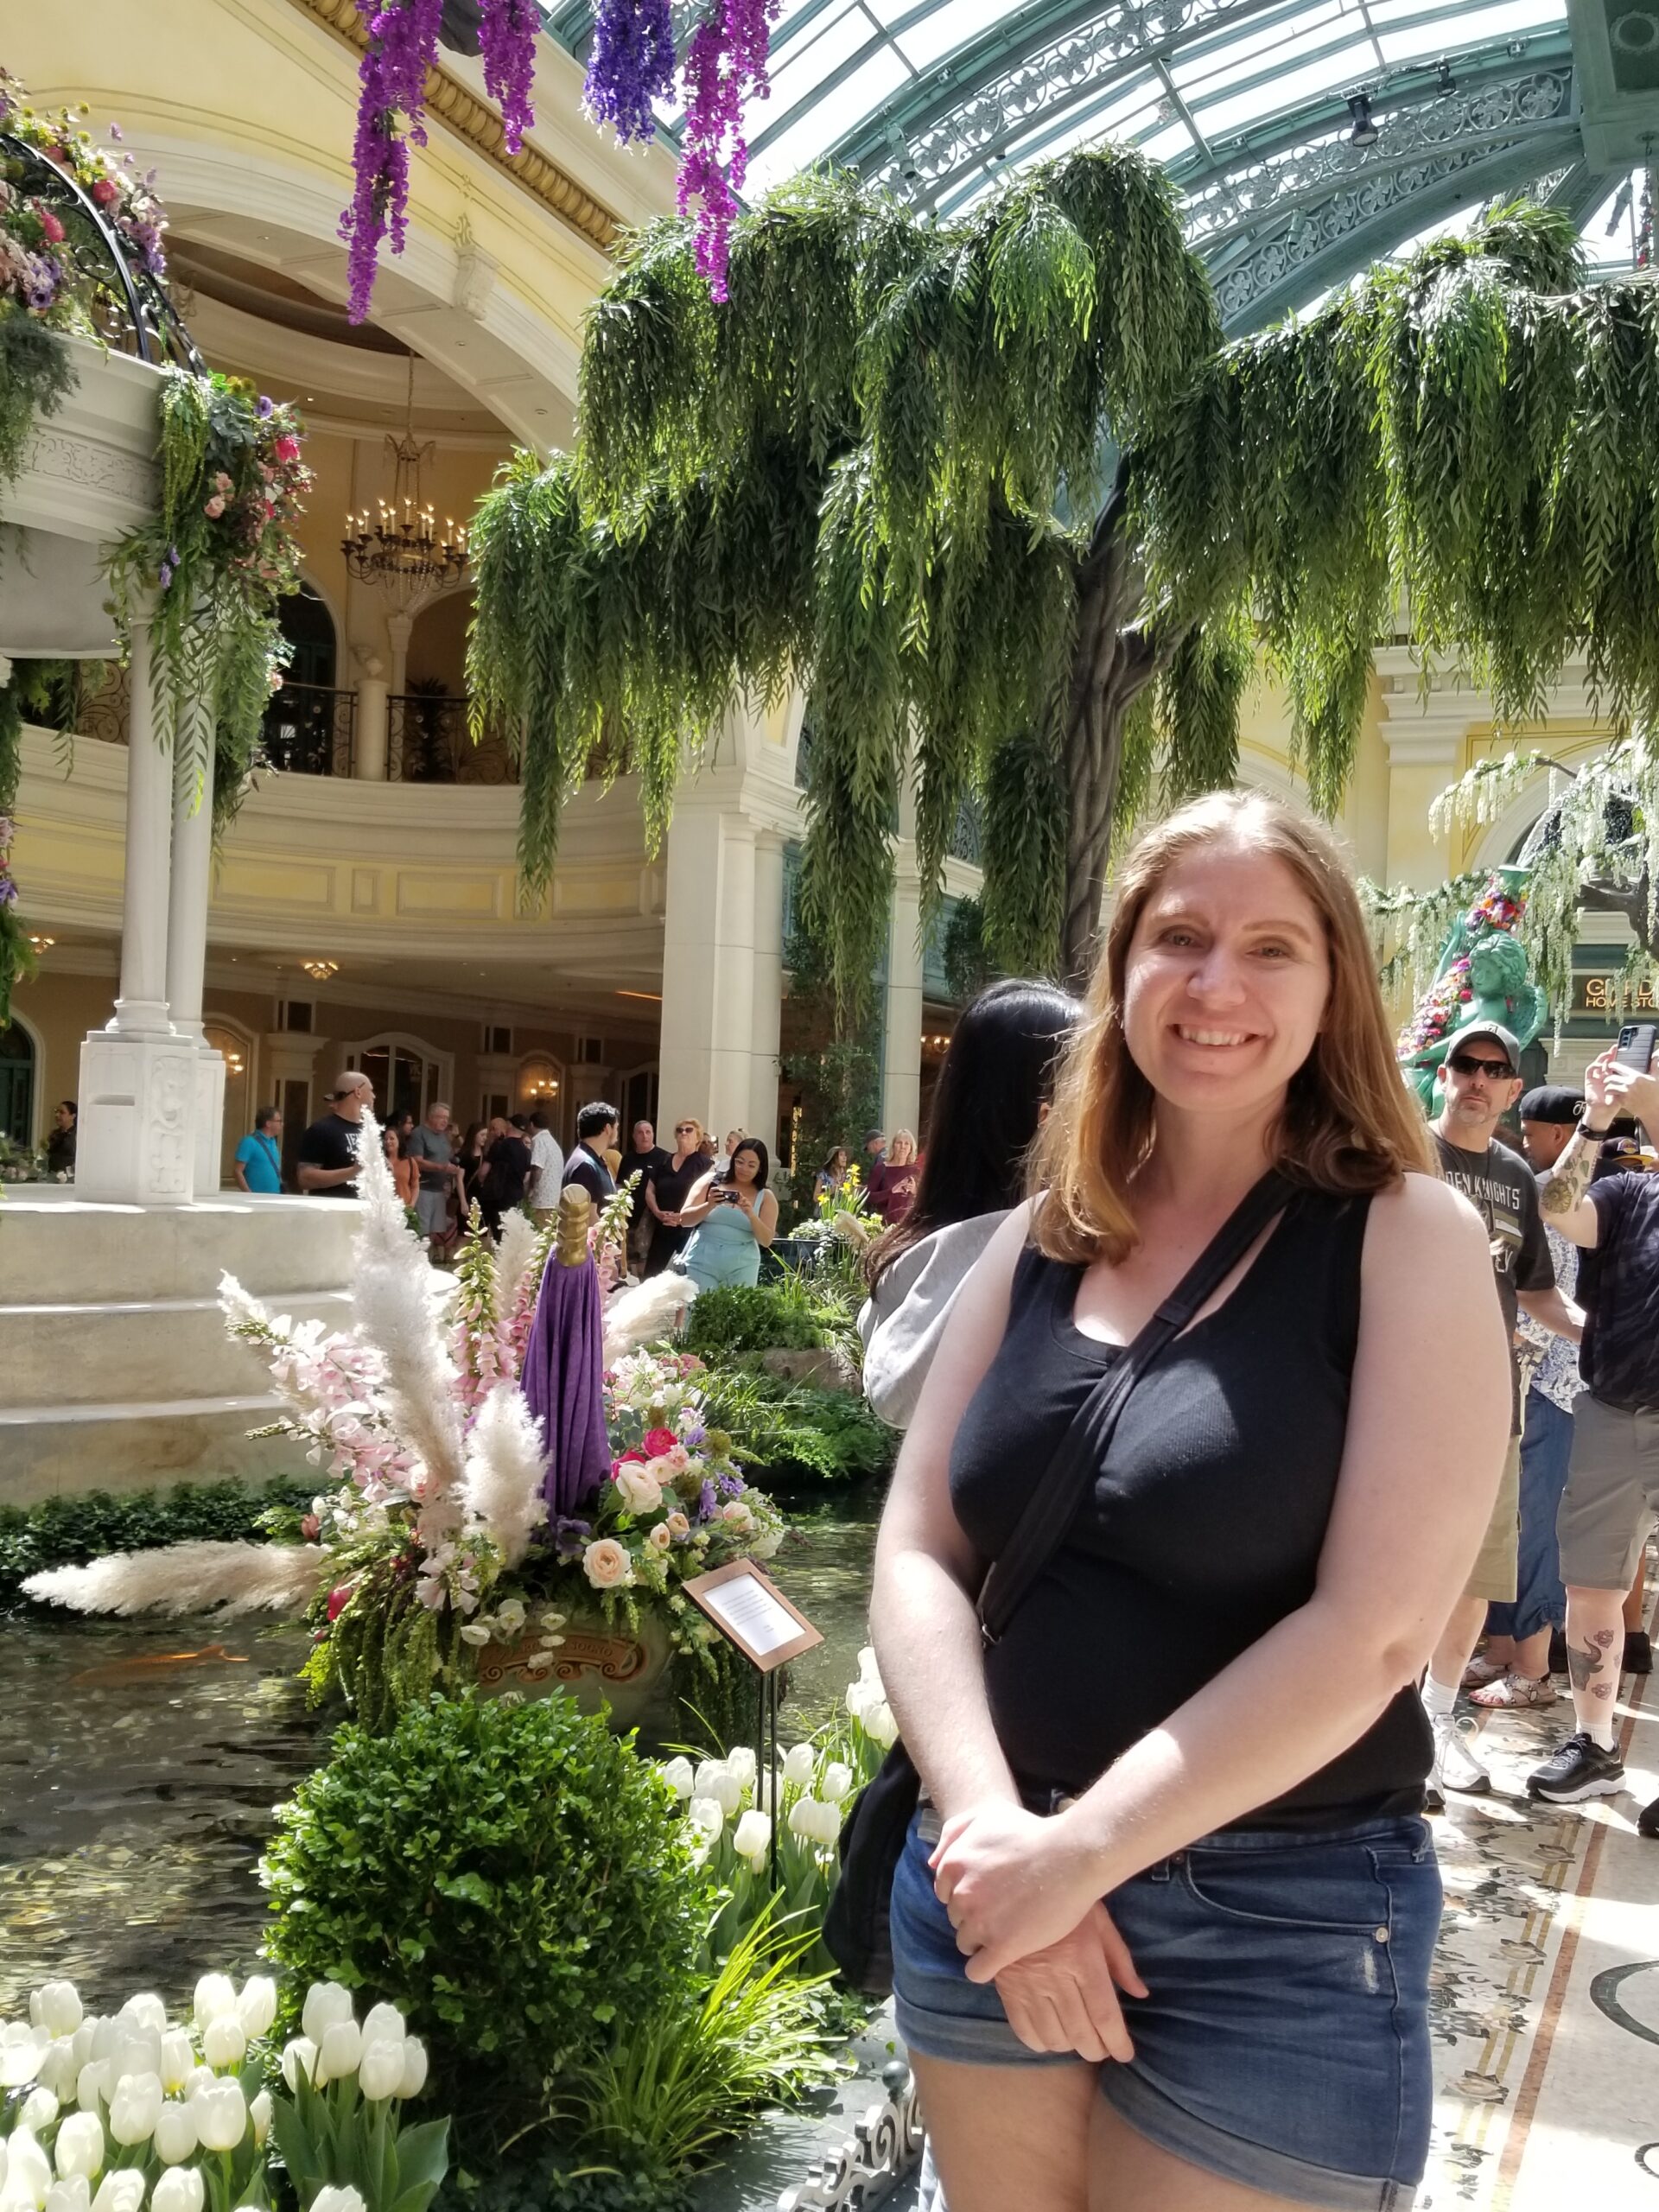 The author, an early forties, but much younger-looking, caucasian female with medium-length strawberry blonde hair clasps her hands while standing at a slight angle to the camera and smiling. She is in the garden at the Bellagio hotel in Las Vegas with sunlight coming in from above. She is wearing a black tank top and denim shorts and is carrying a black purse. 